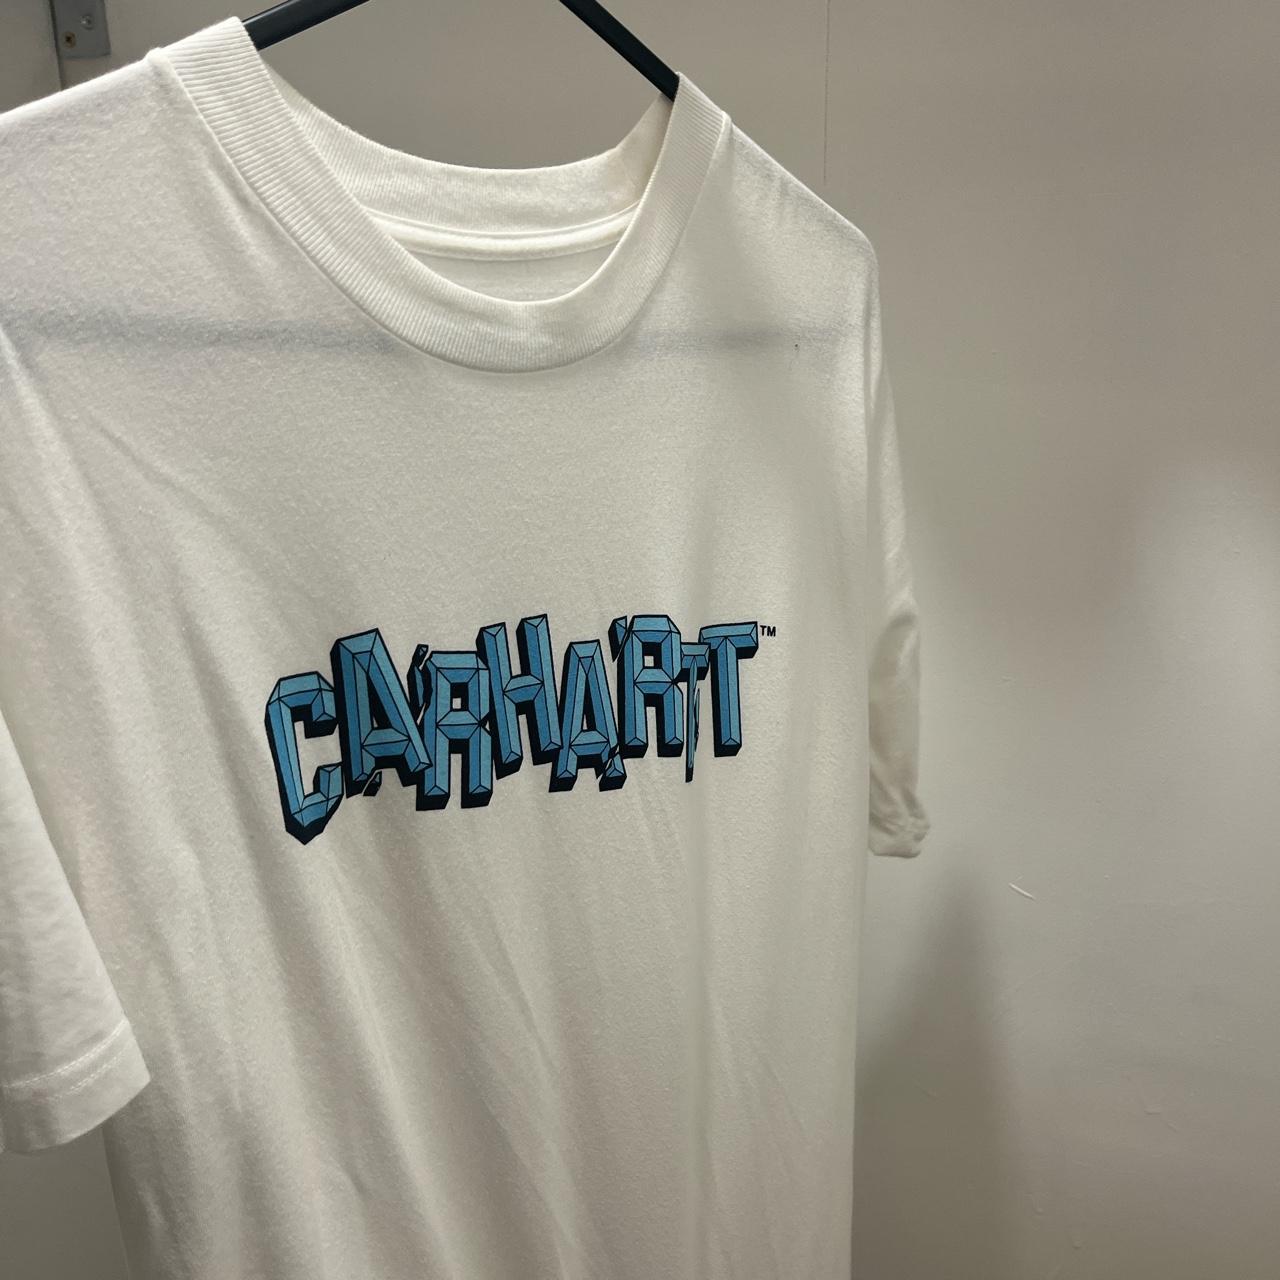 Blue graphic carhart T-shirt worn on one holiday and... - Depop